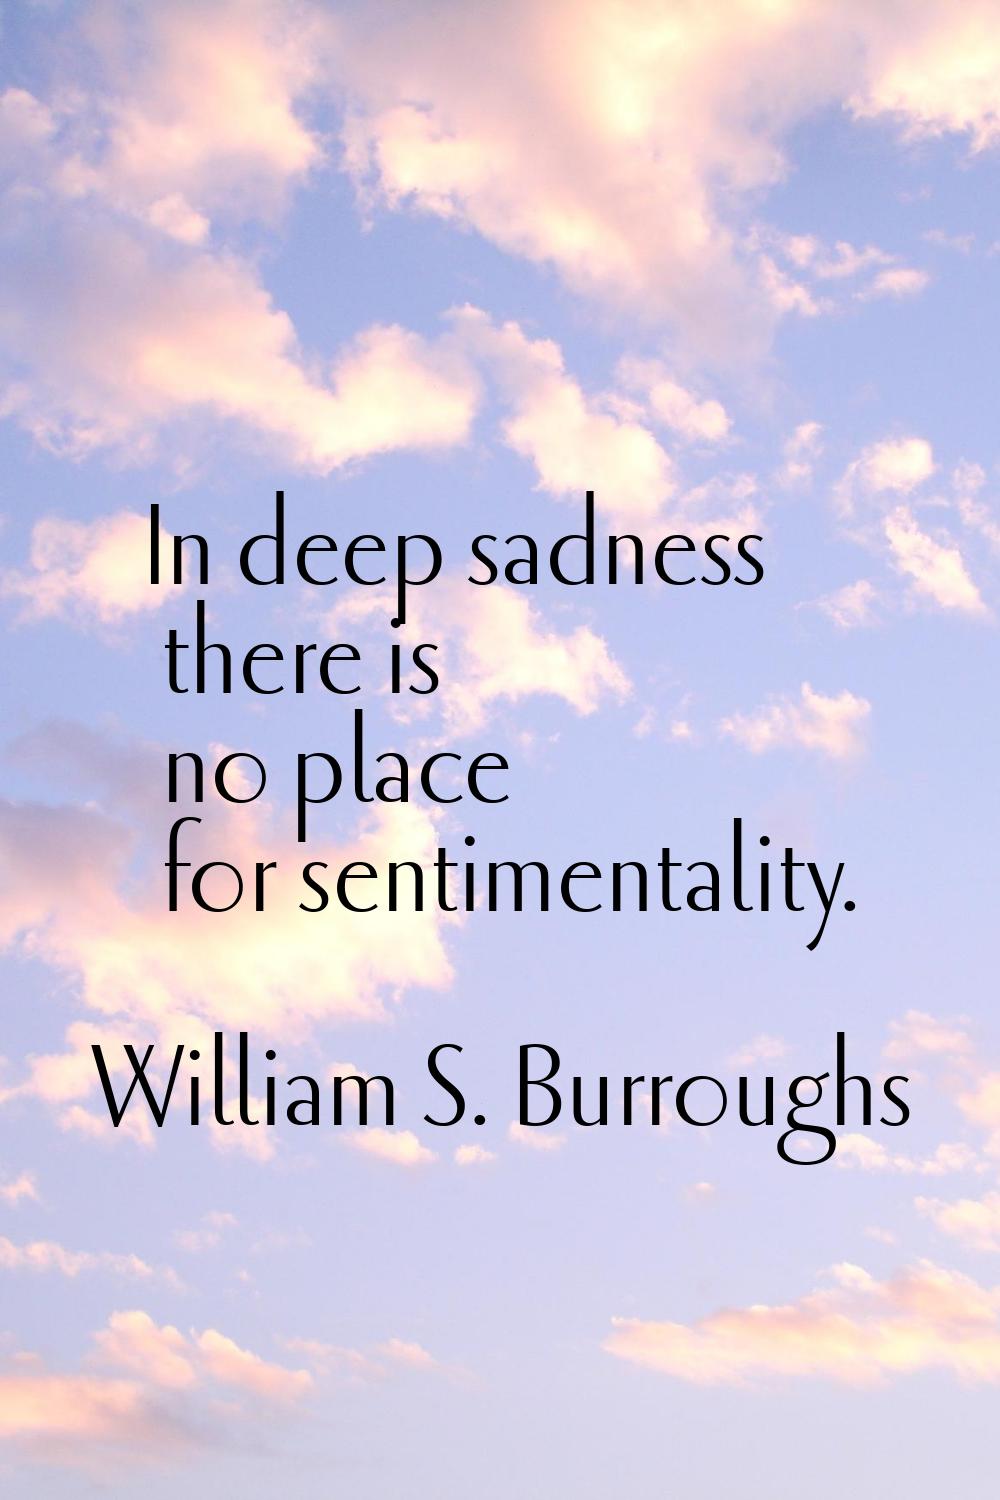 In deep sadness there is no place for sentimentality.